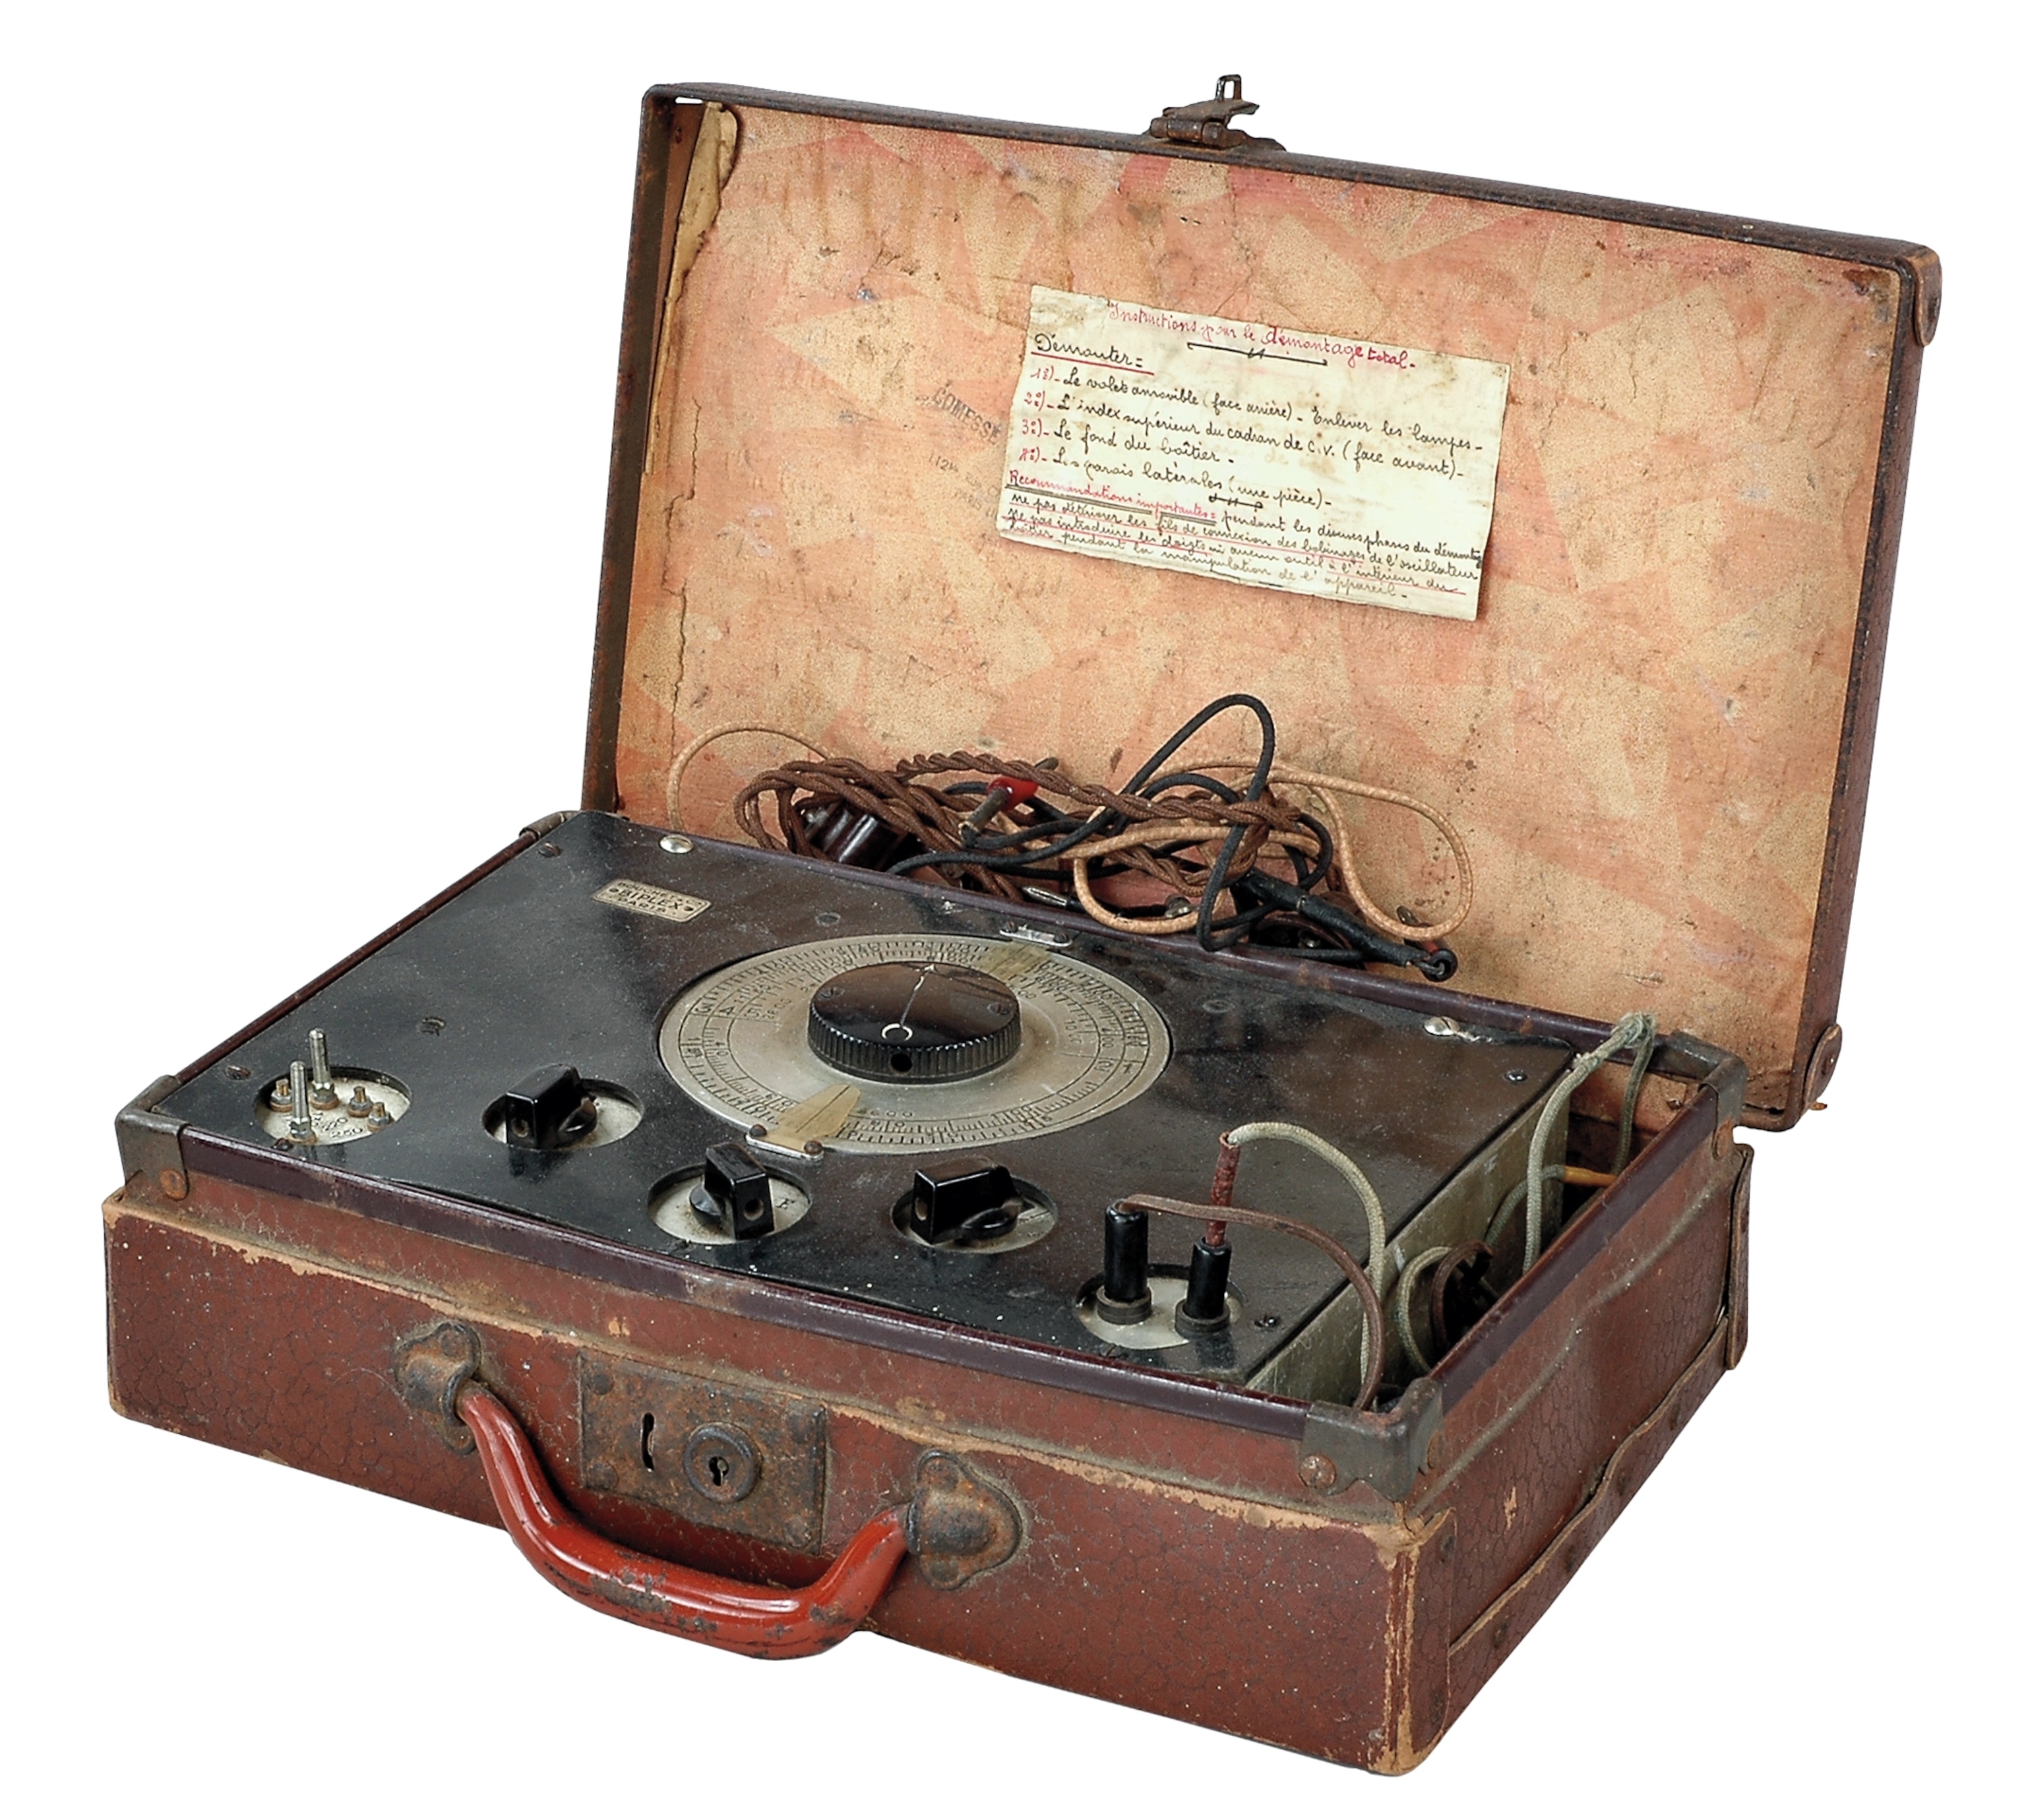 a radio set concealed in a suitcase used to report on German forces in Normandy